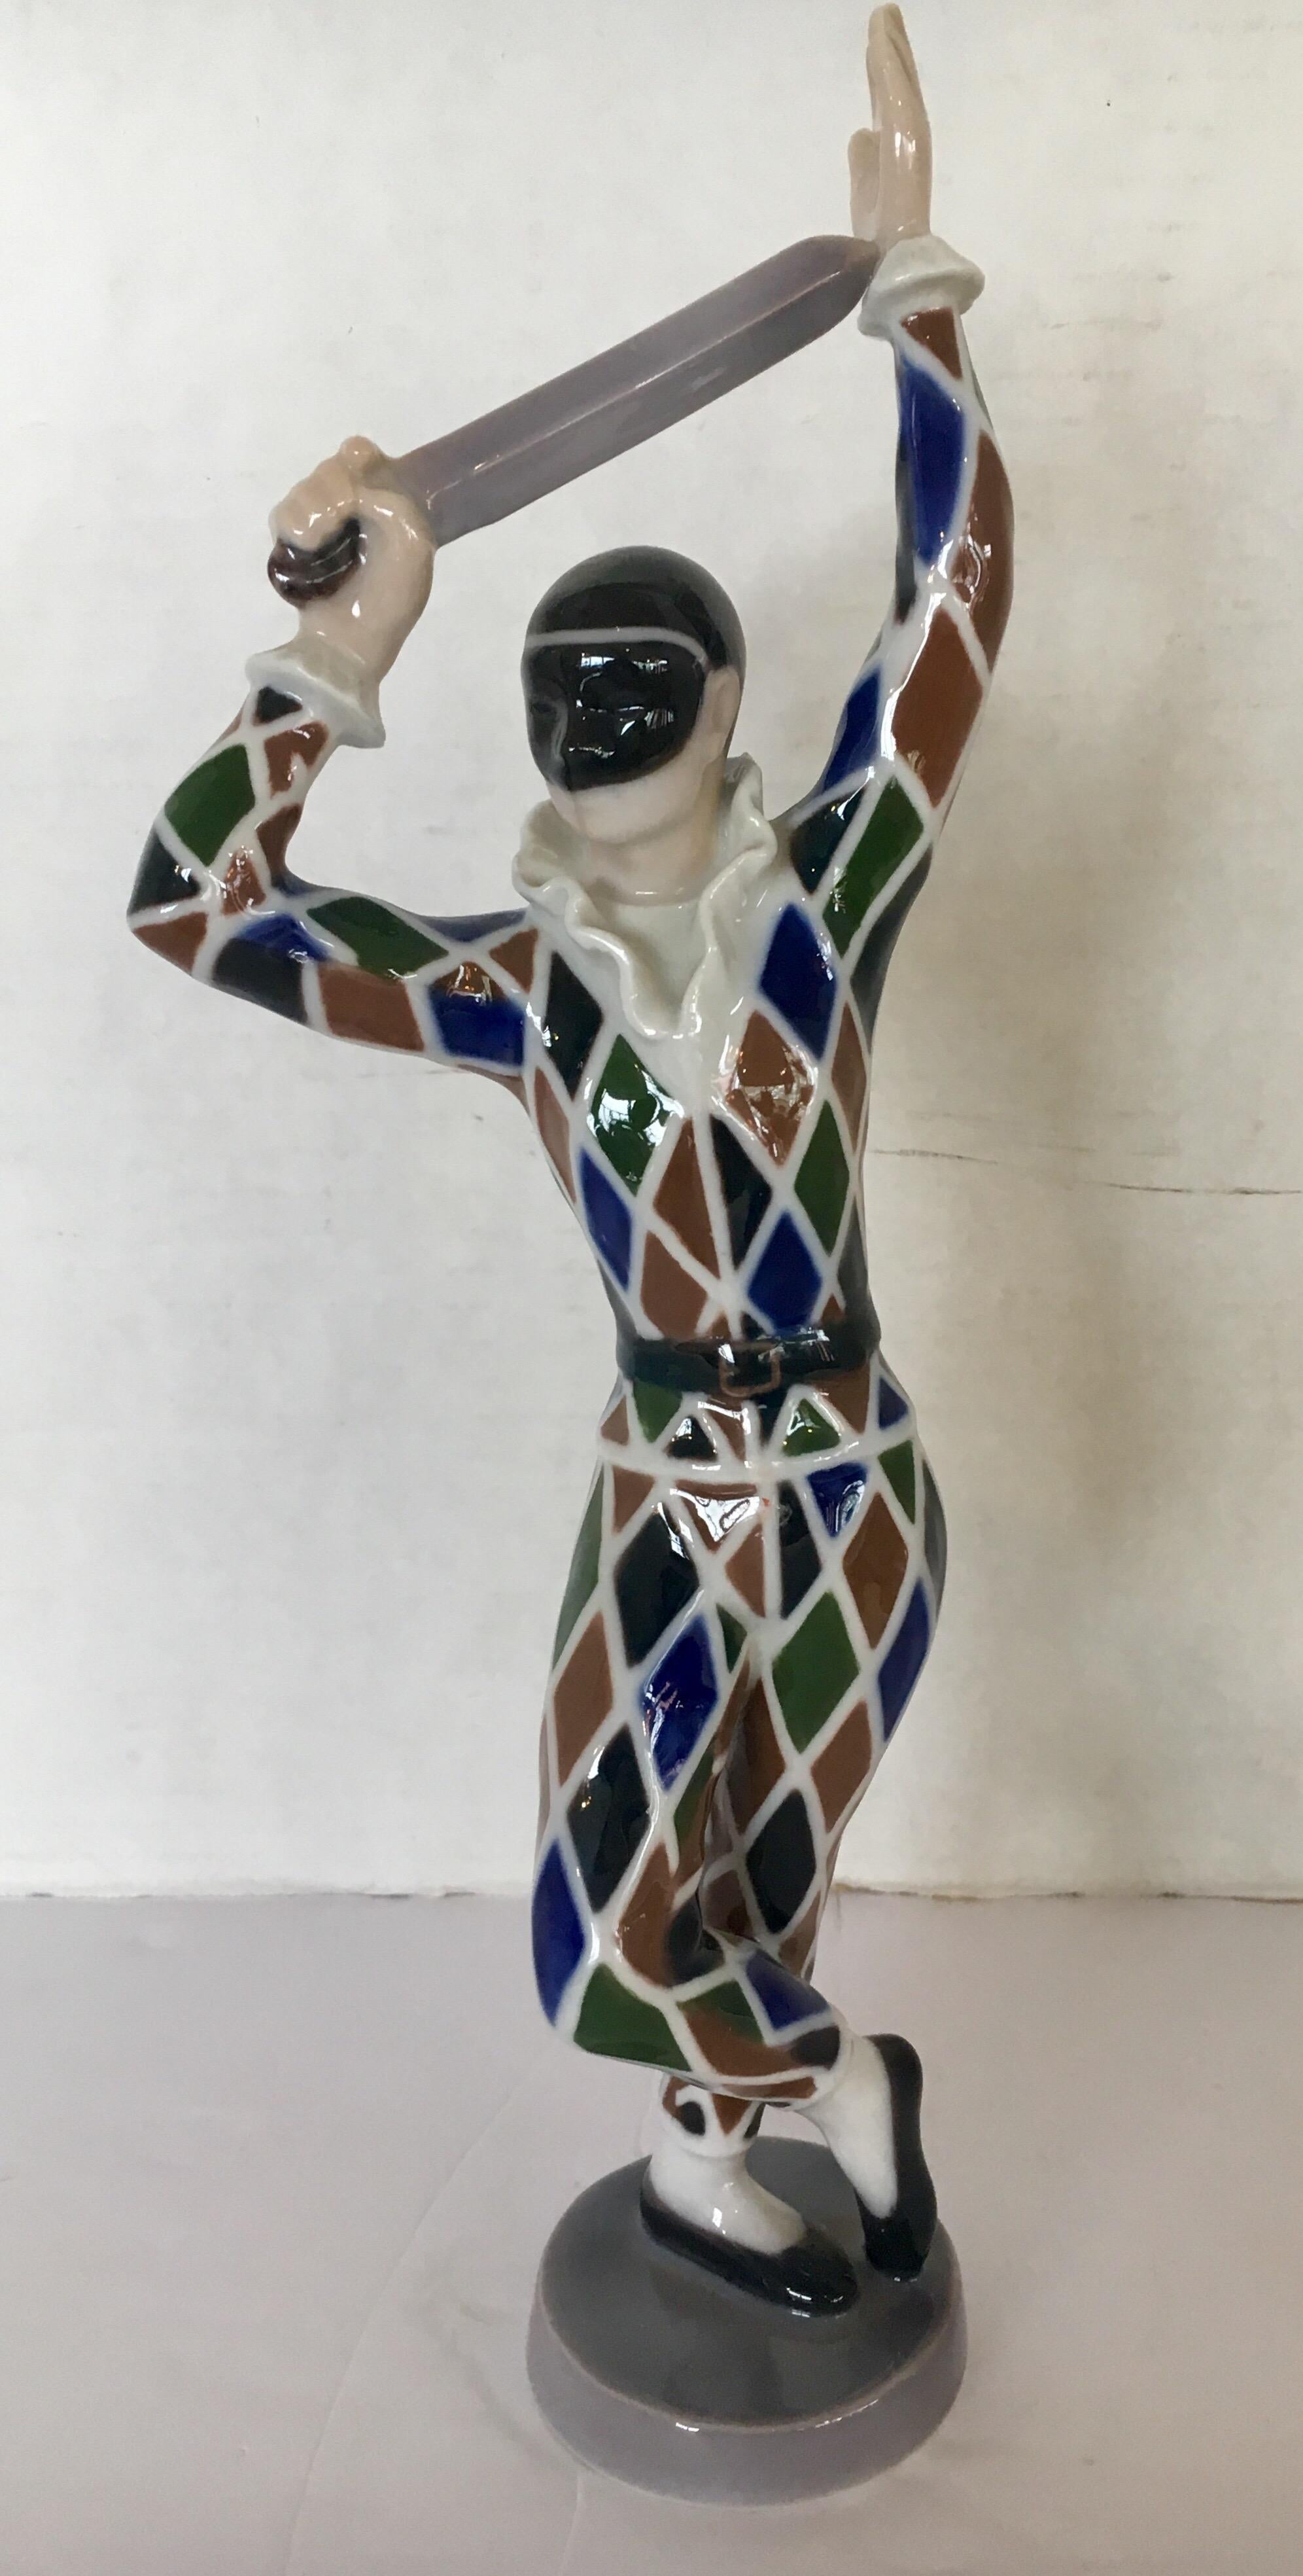 Signed B&G Copenhagen Harlequin series figurine. Mint condition, hallmarked with 2354 DR and all B&G hallmarks. Vivid colors of brown, green, blue, black, white and a silver sword.